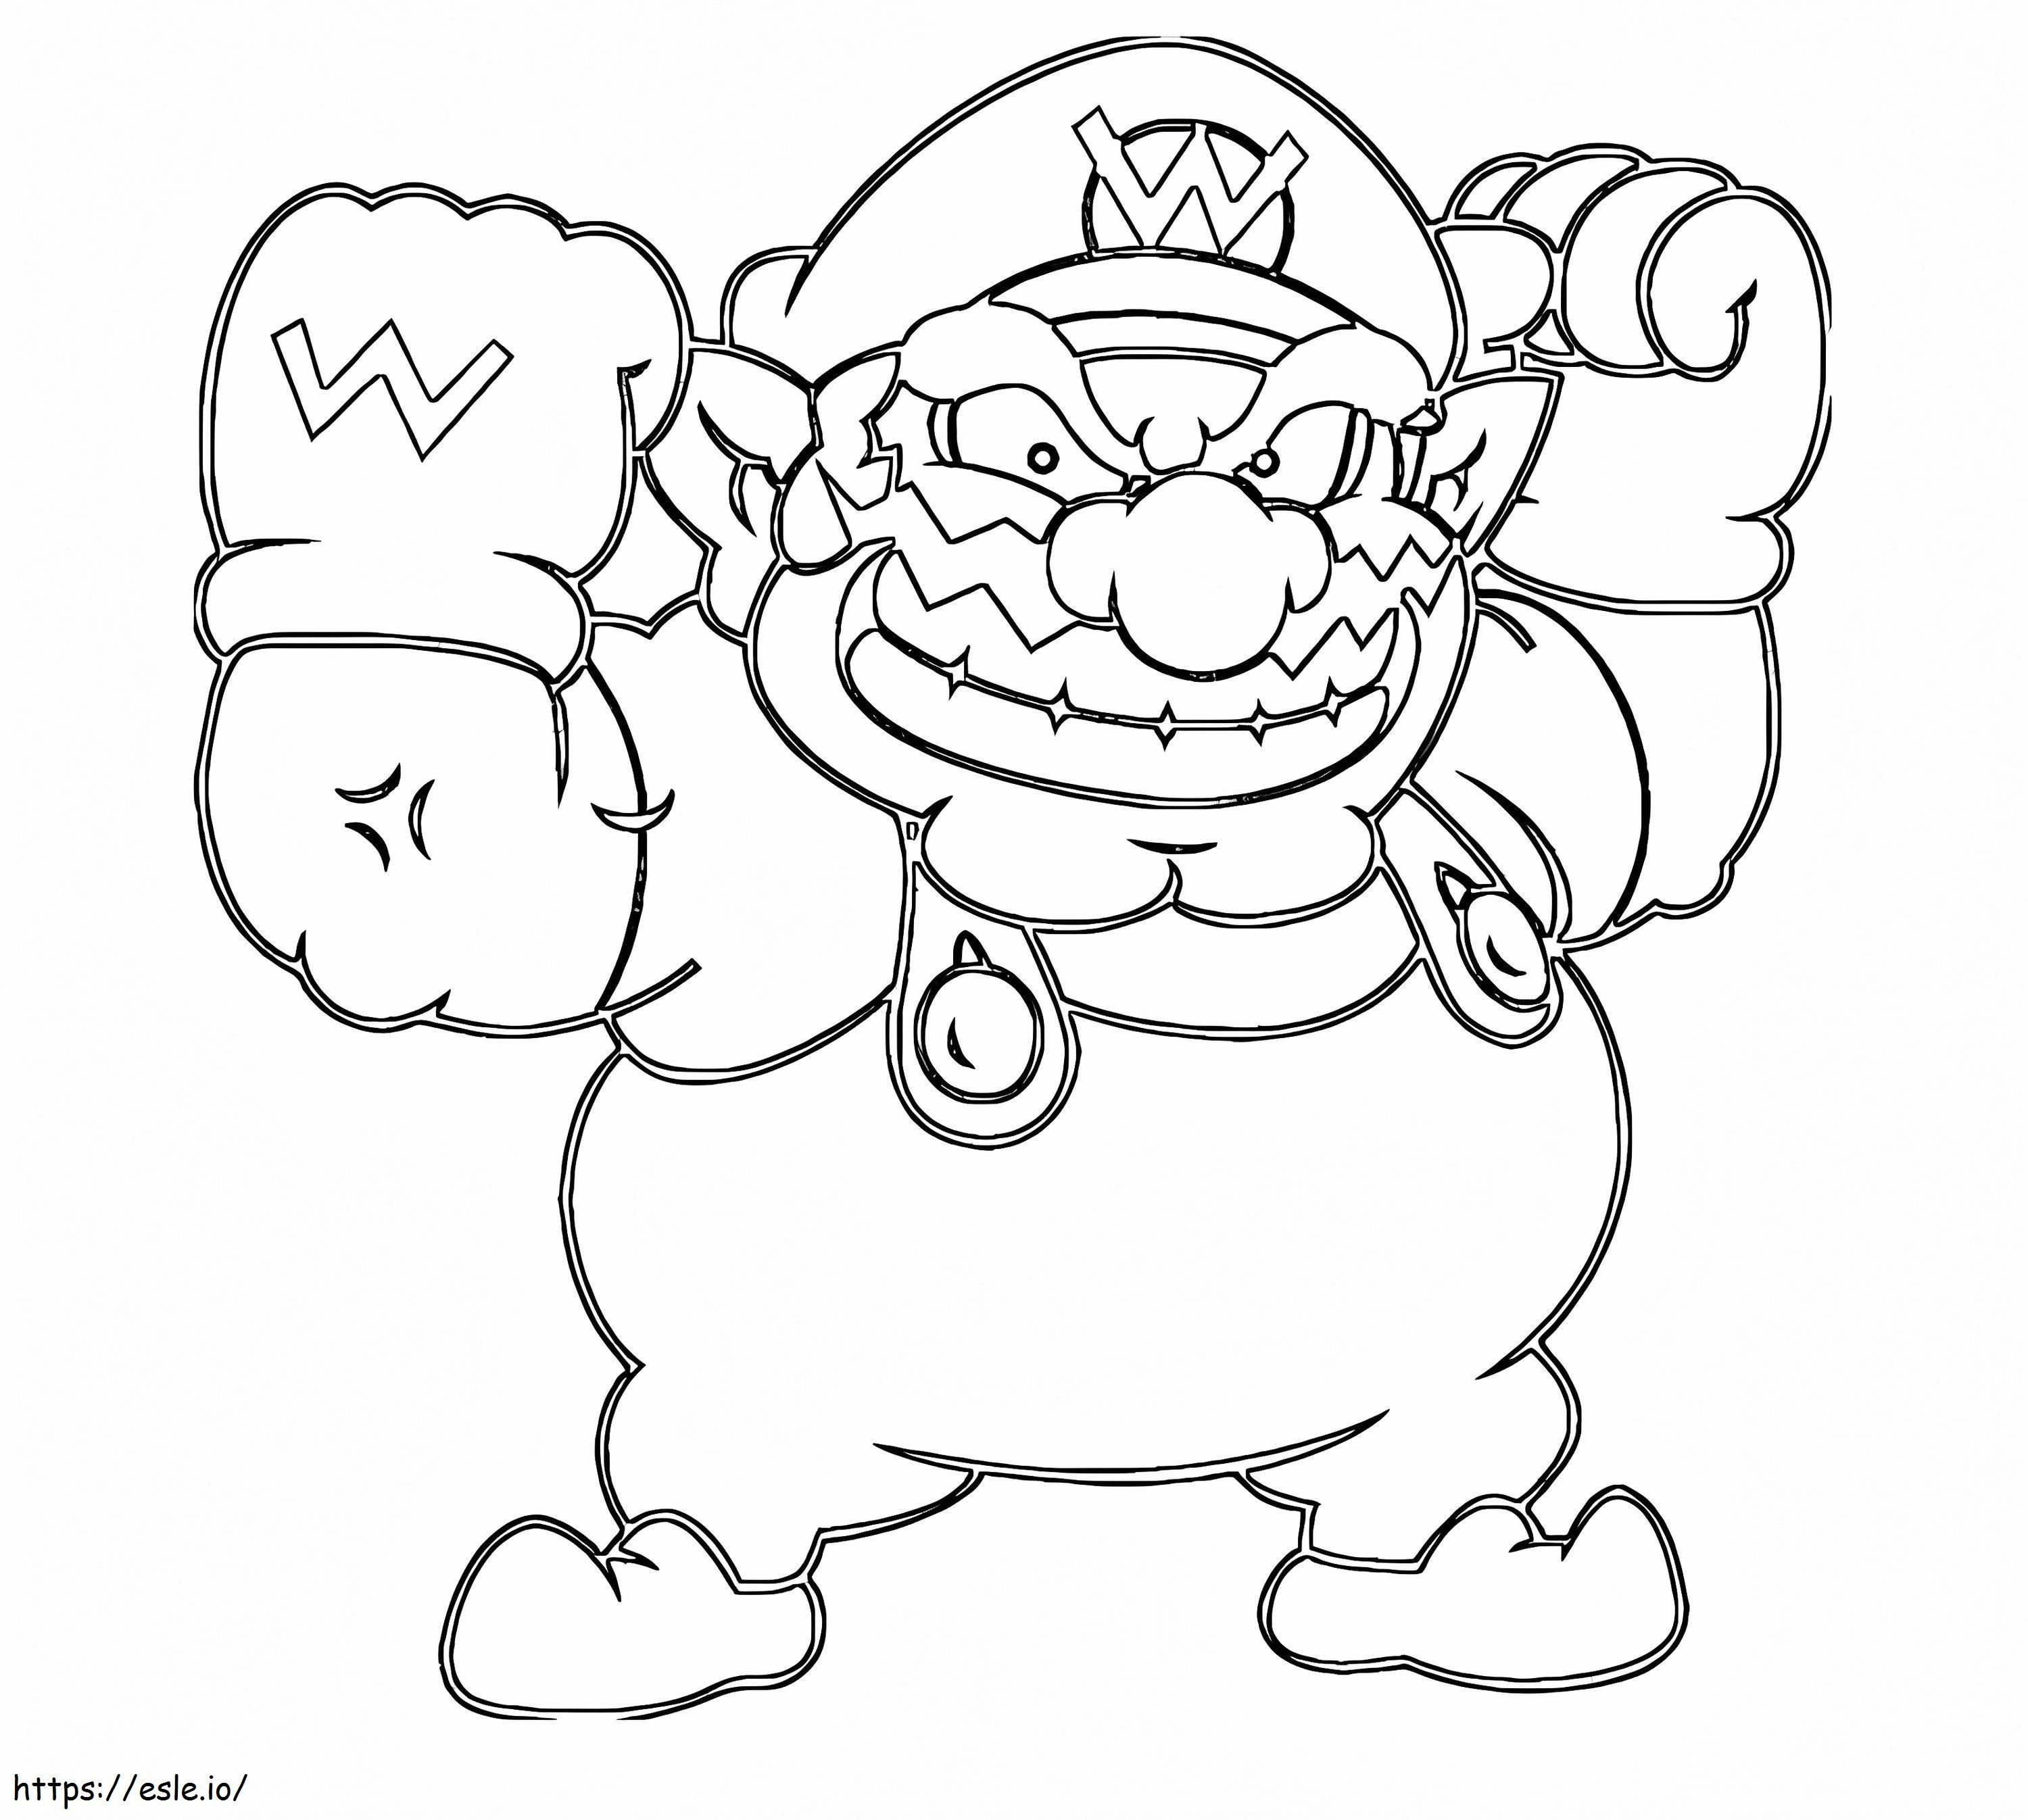 Strong Wario coloring page